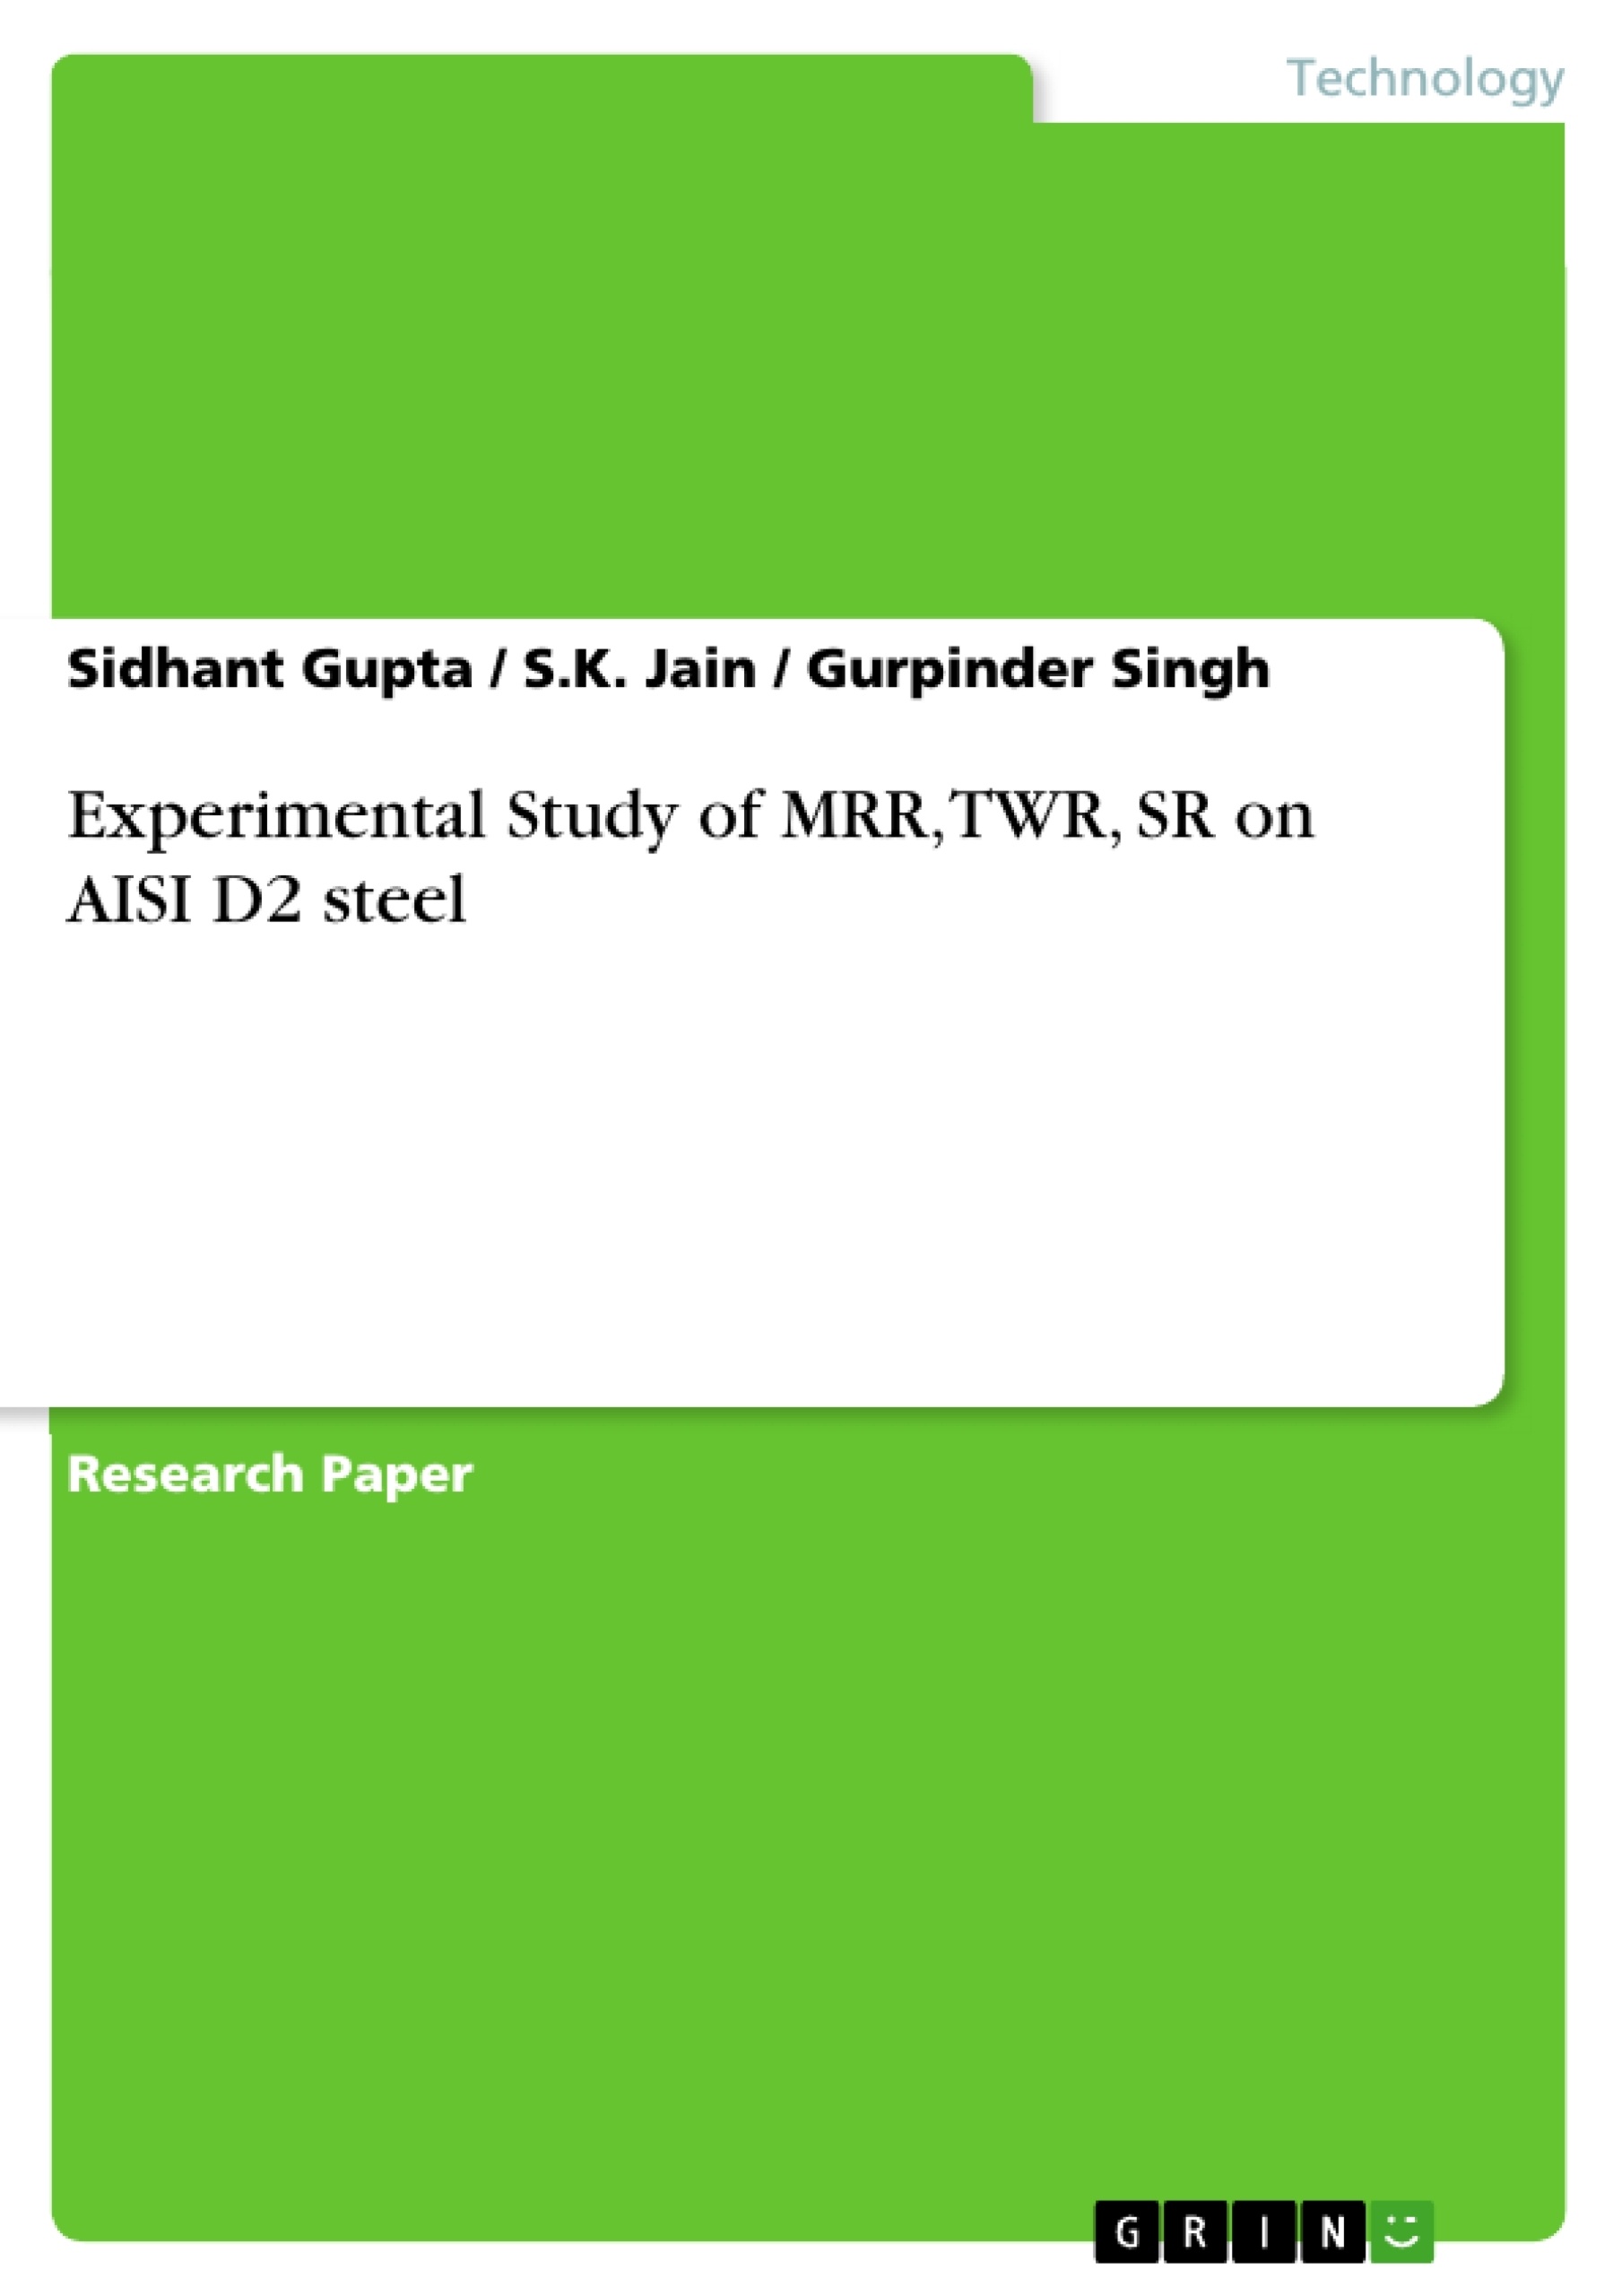 Title: Experimental Study of MRR, TWR, SR on AISI D2 steel